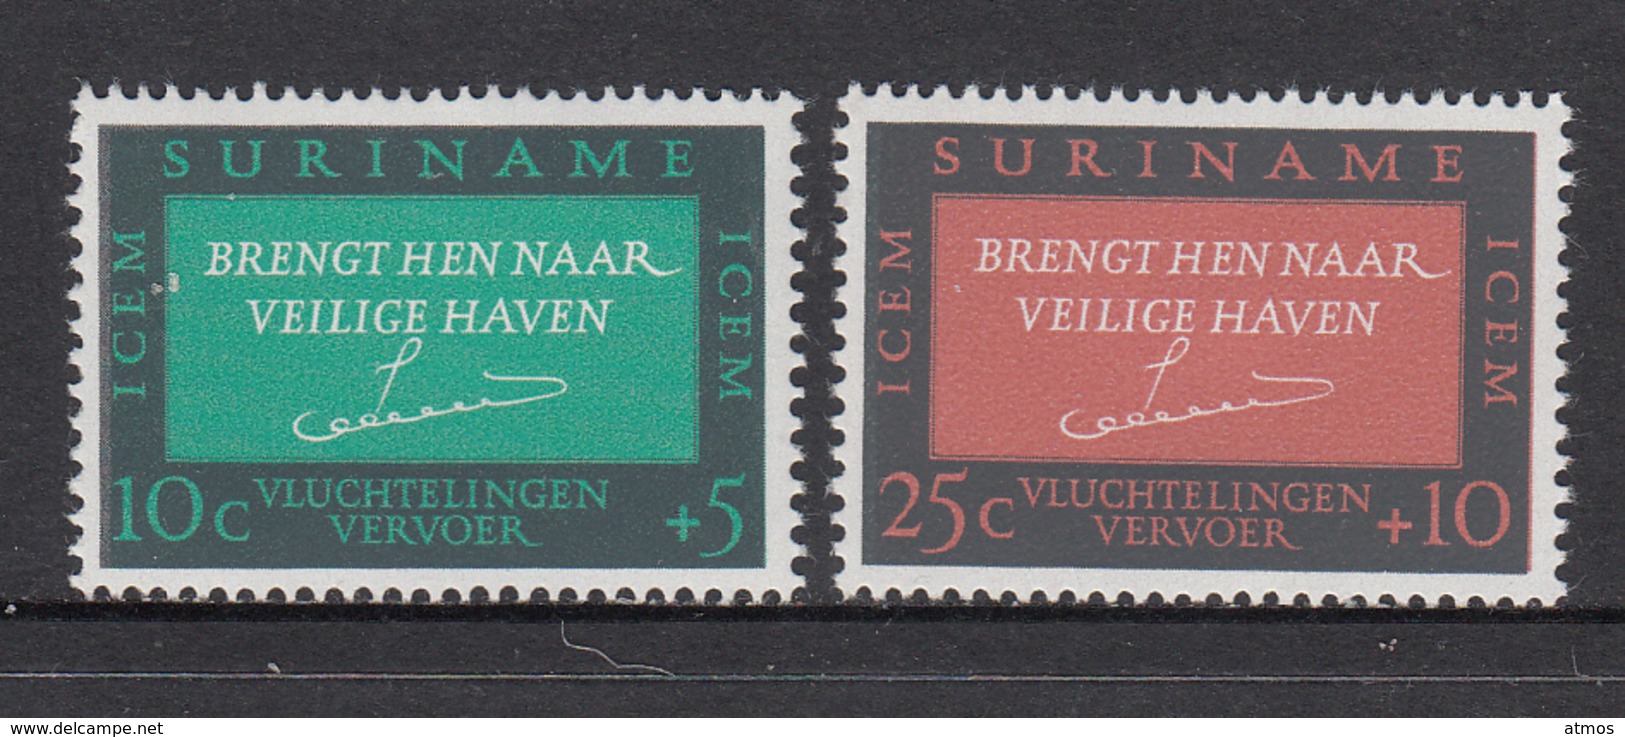 Suriname MNH NVPH Nr 436/37 From 1966 / Catw 0.60 EUR - Suriname